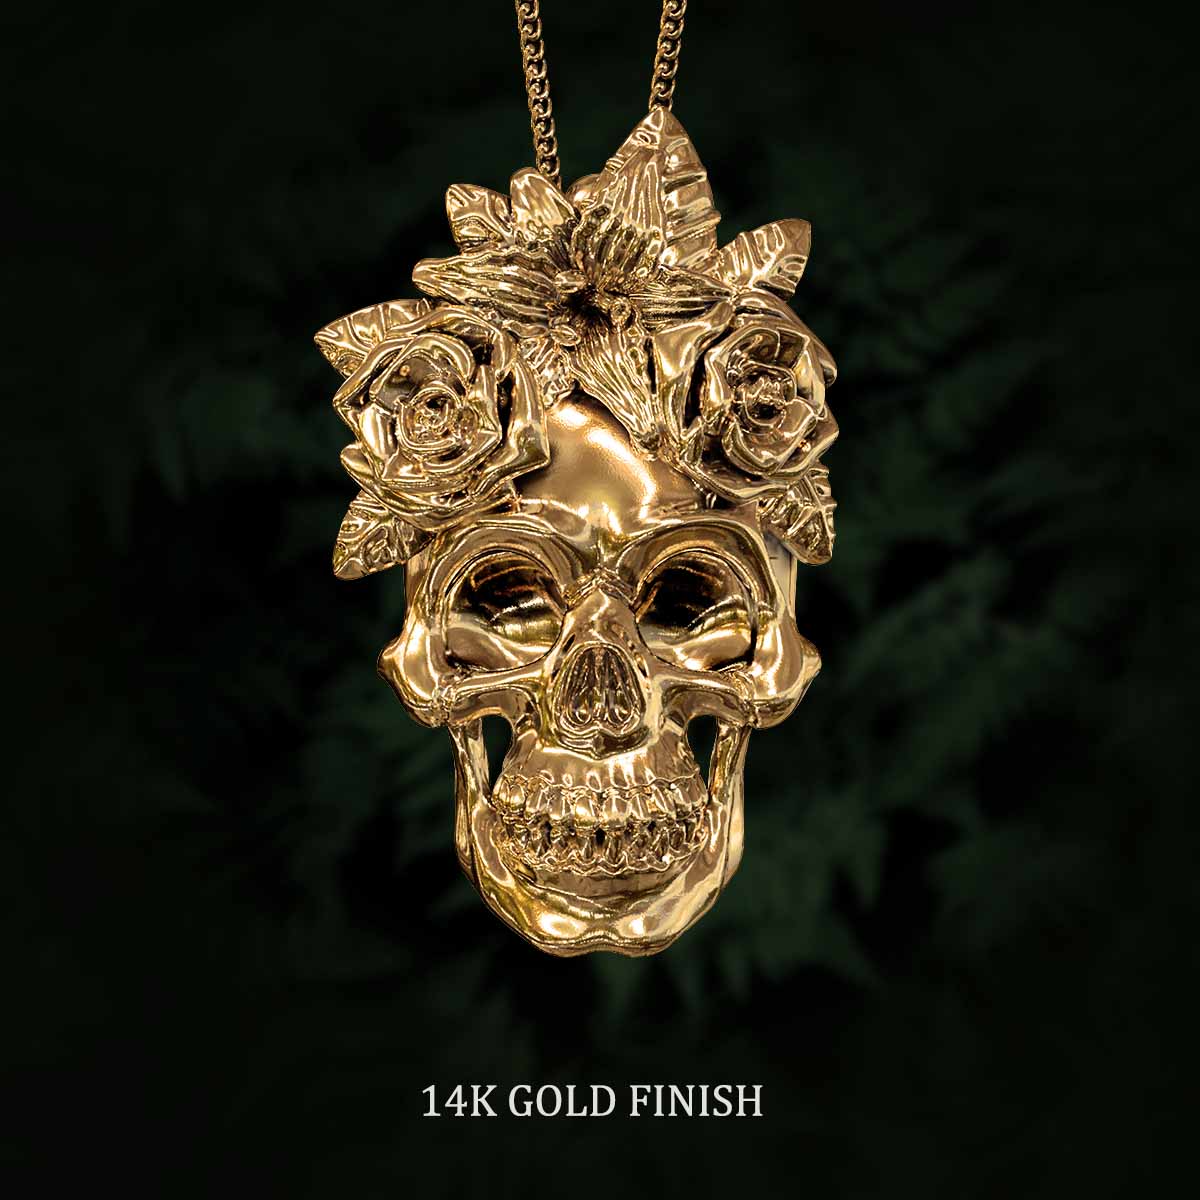     14k-Gold-Finish-Human-Skull-and-Flowers-Pendant-Jewelry-For-Necklace